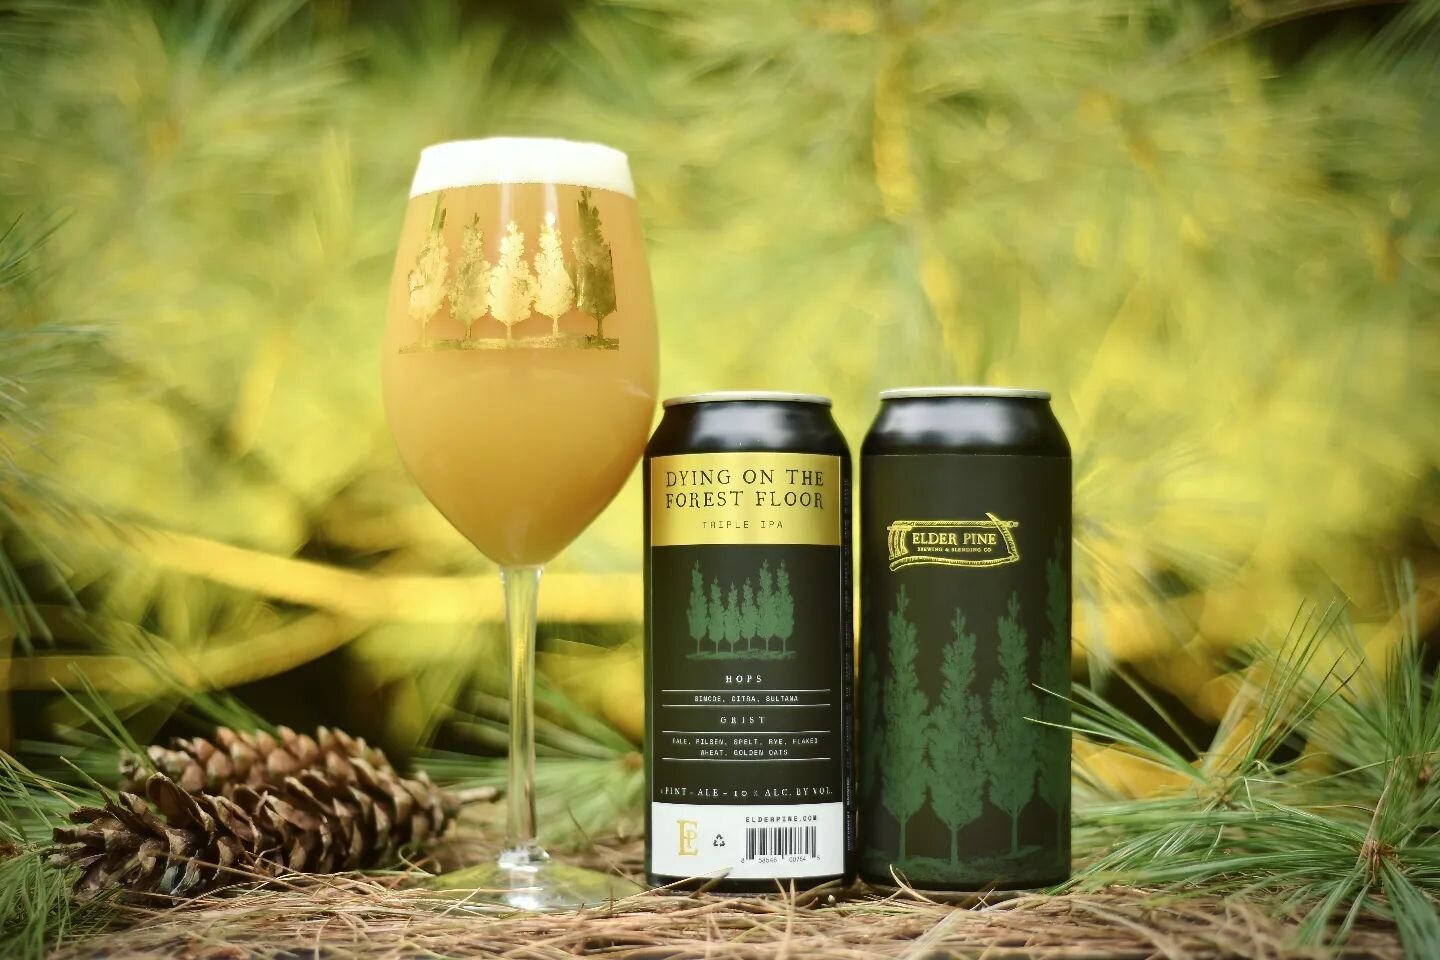 DYING ON THE FOREST FLOOR
Hazy Triple IPA
10% abv

This massive TIPA is brewed with high protein grains for a soft &amp; creamy mouthfeel and irresponsibly hopped with Simcoe, Citra, and Sultana. The Simcoe produces an insane level of saturated sappi